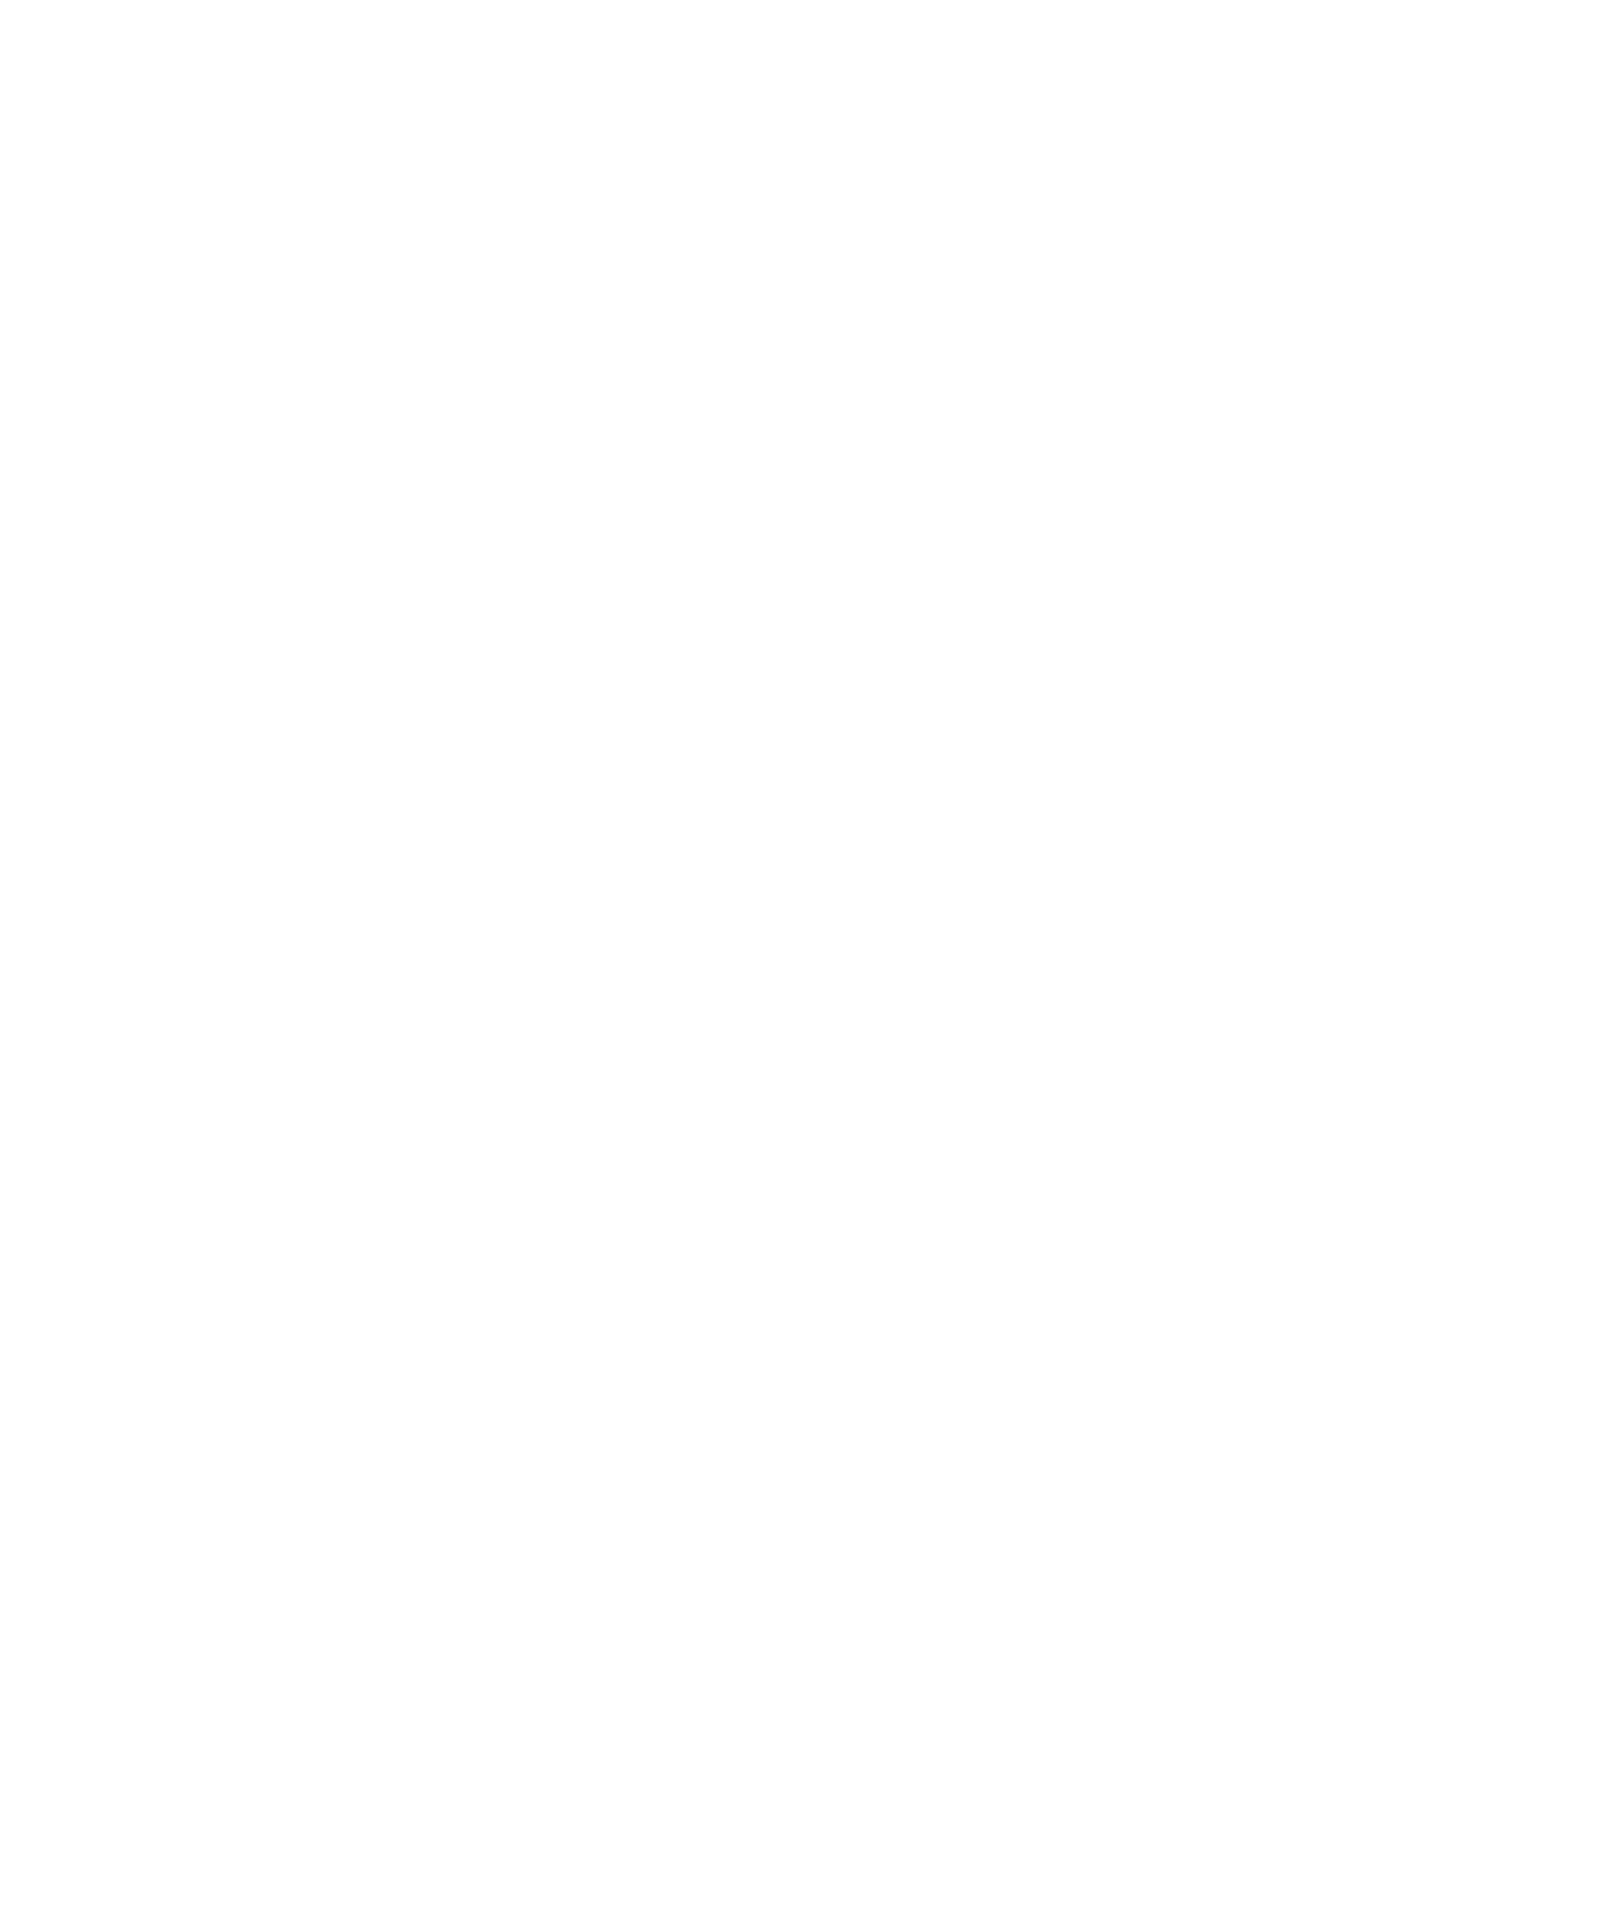 Fromagerie du Puits Neuf